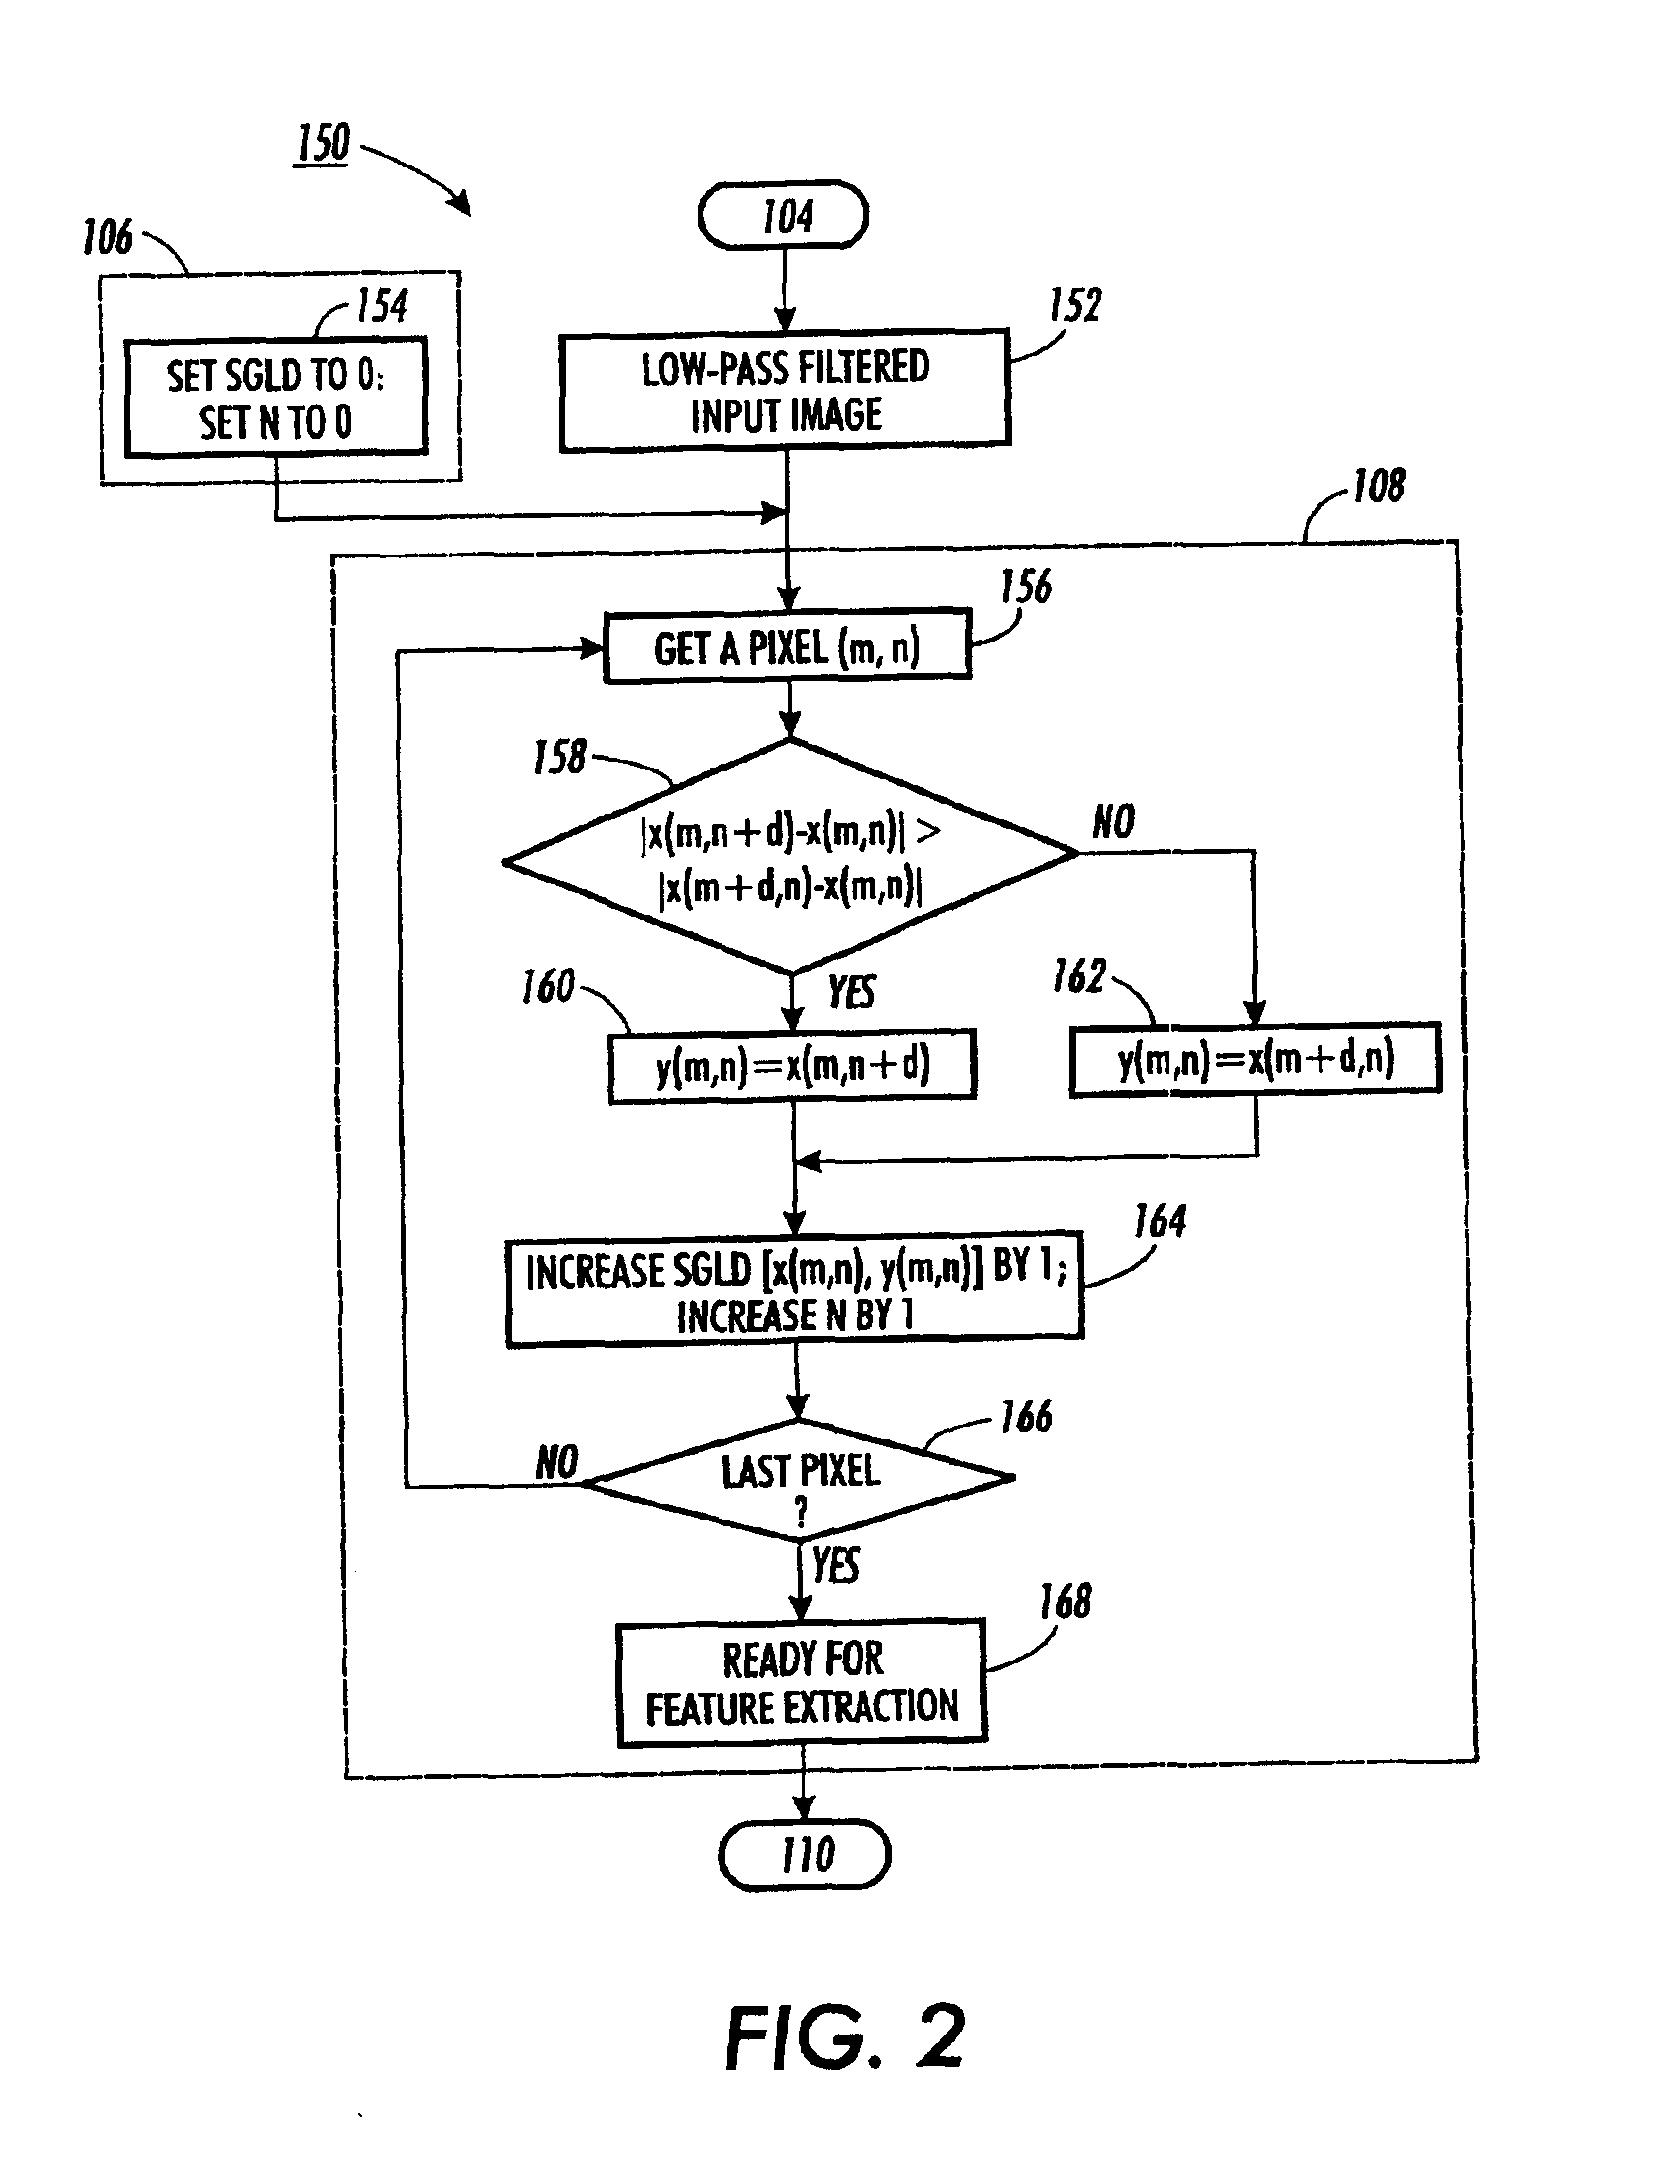 Soft picture/graphics classification system and method